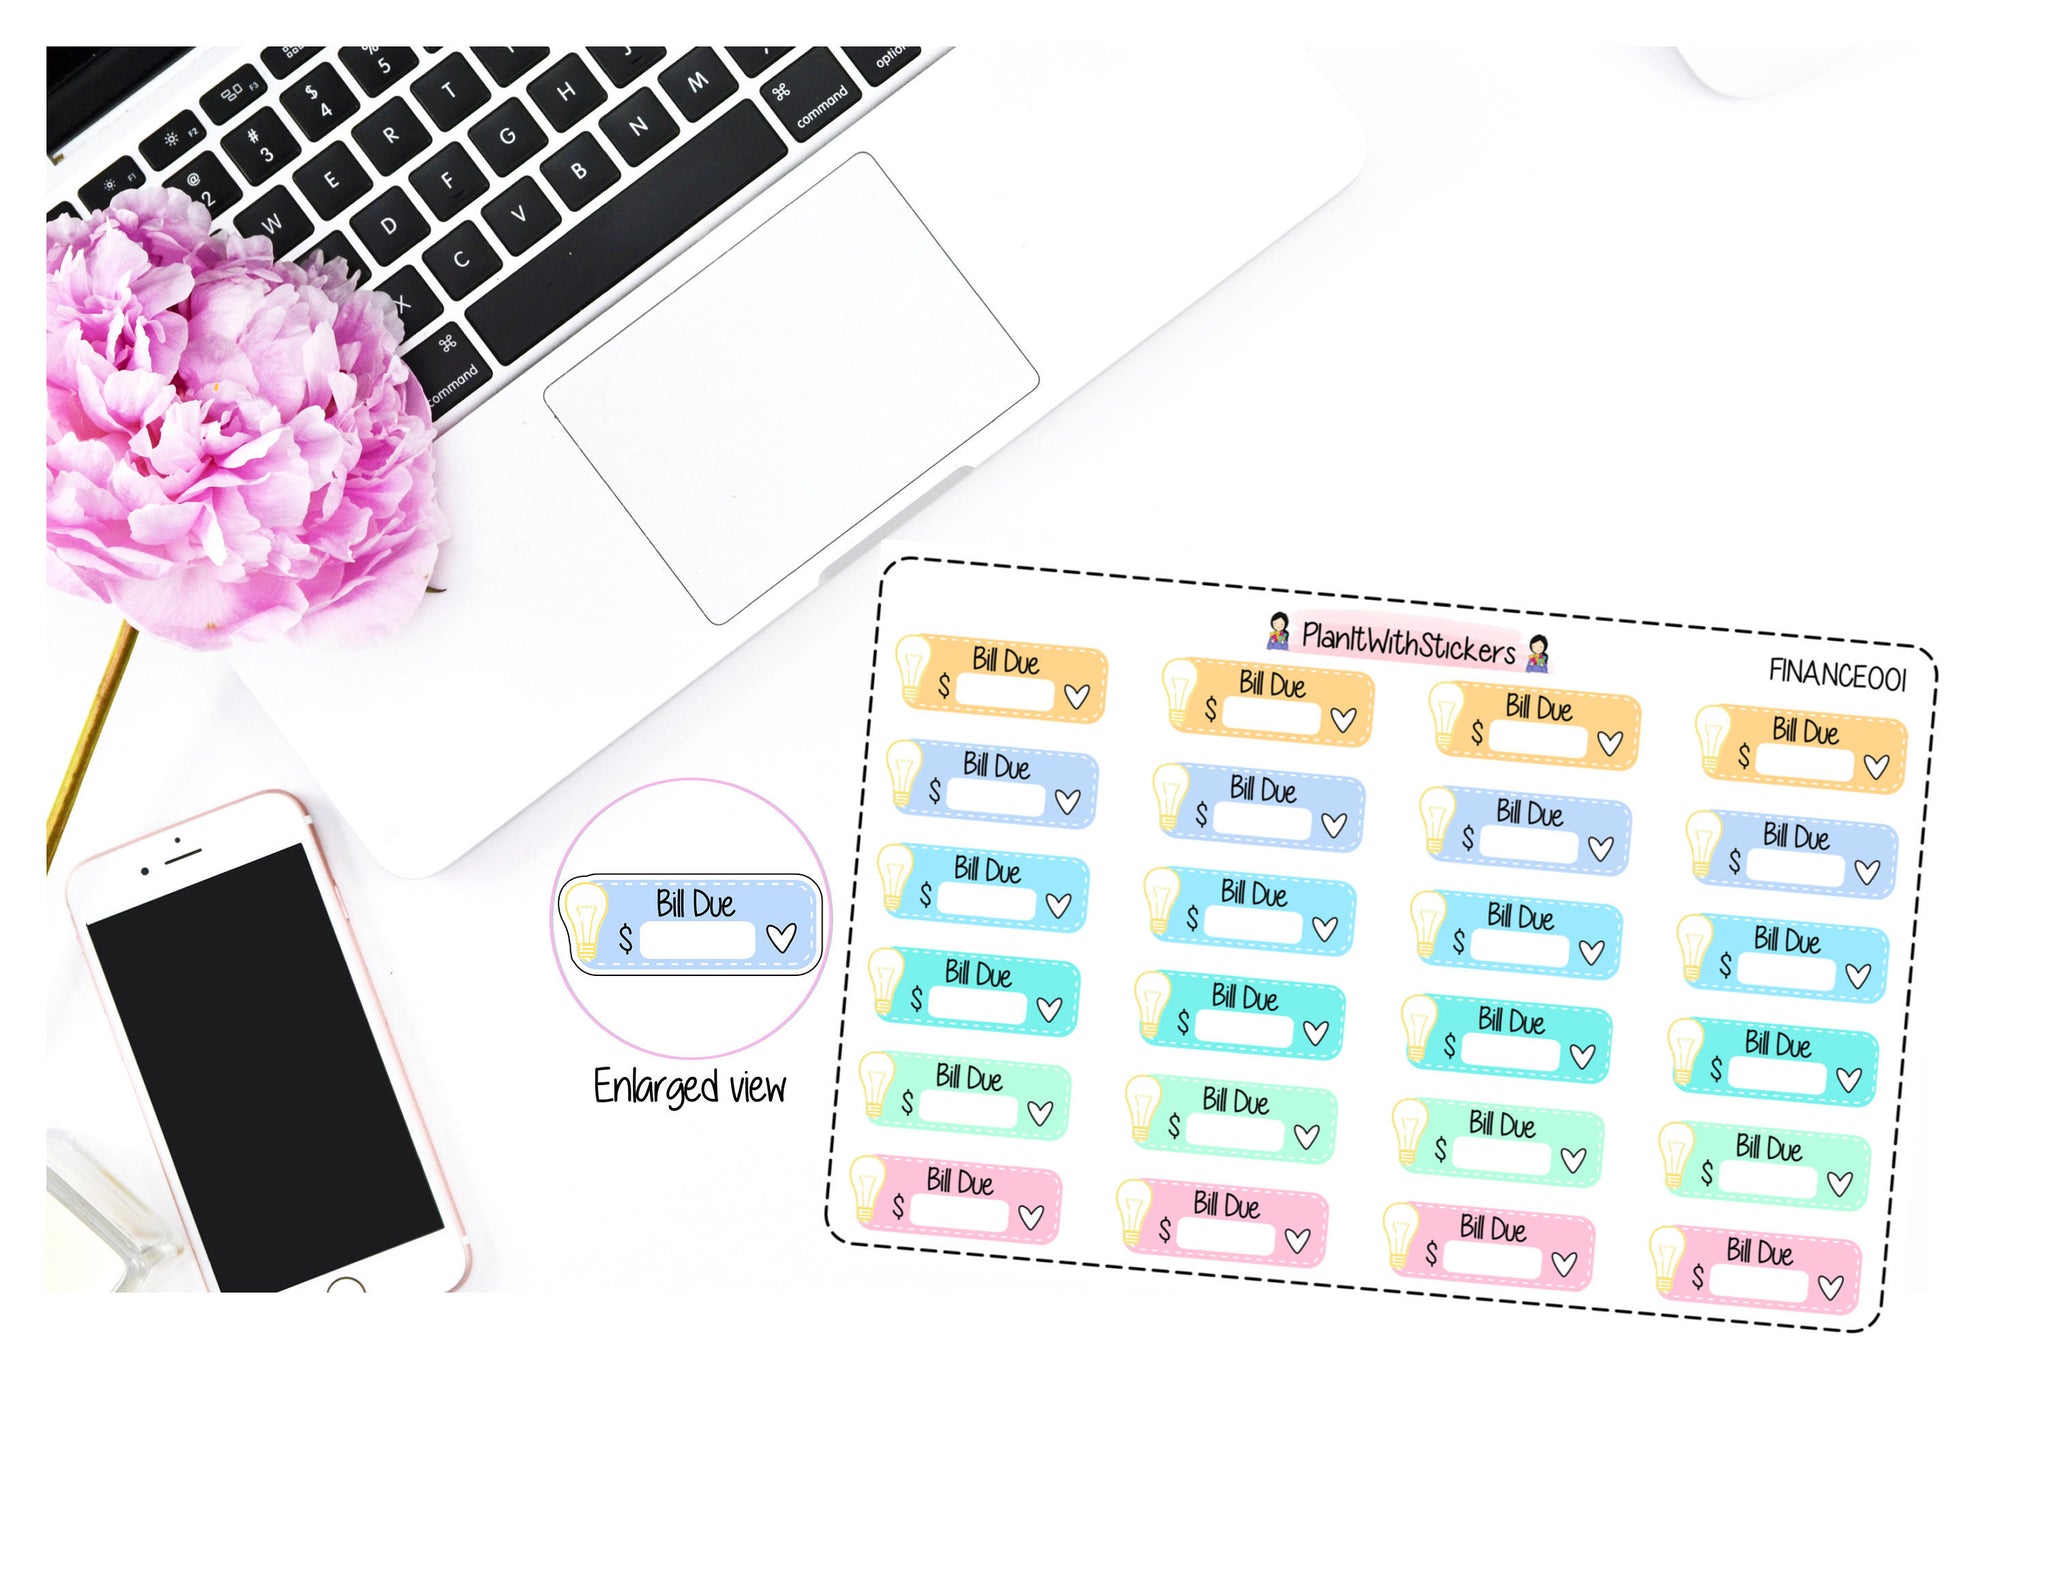 Electricity Bill Due Pay Bill Planner Stickers in Pastel Colours for , Plum Paper, Recollections, and similar planners